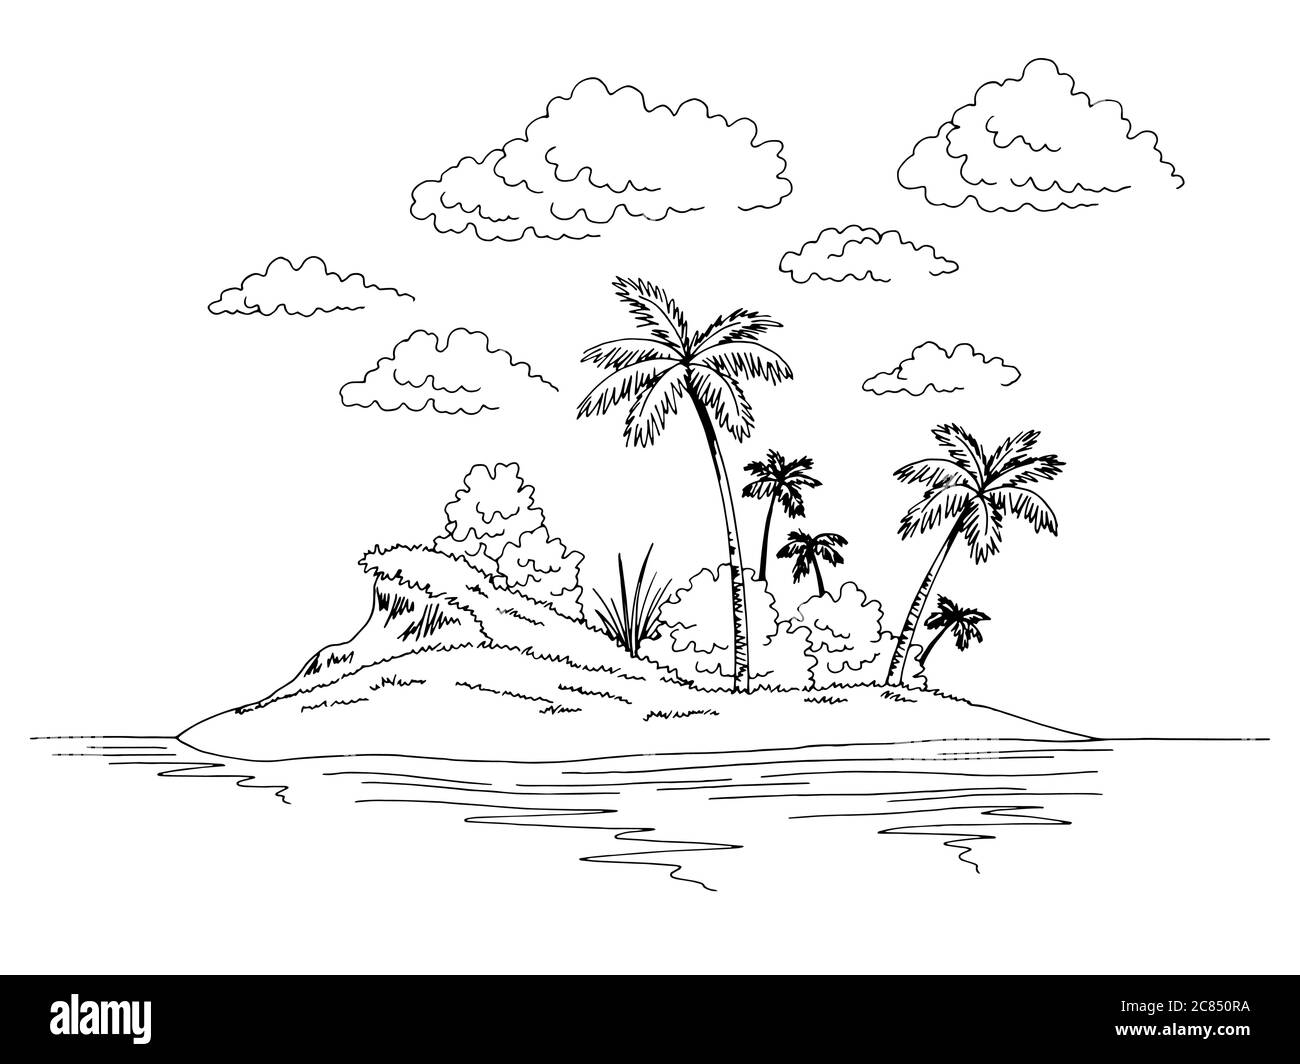 Sketching Island by pencil 😍🤘🌴🌊 on Behance